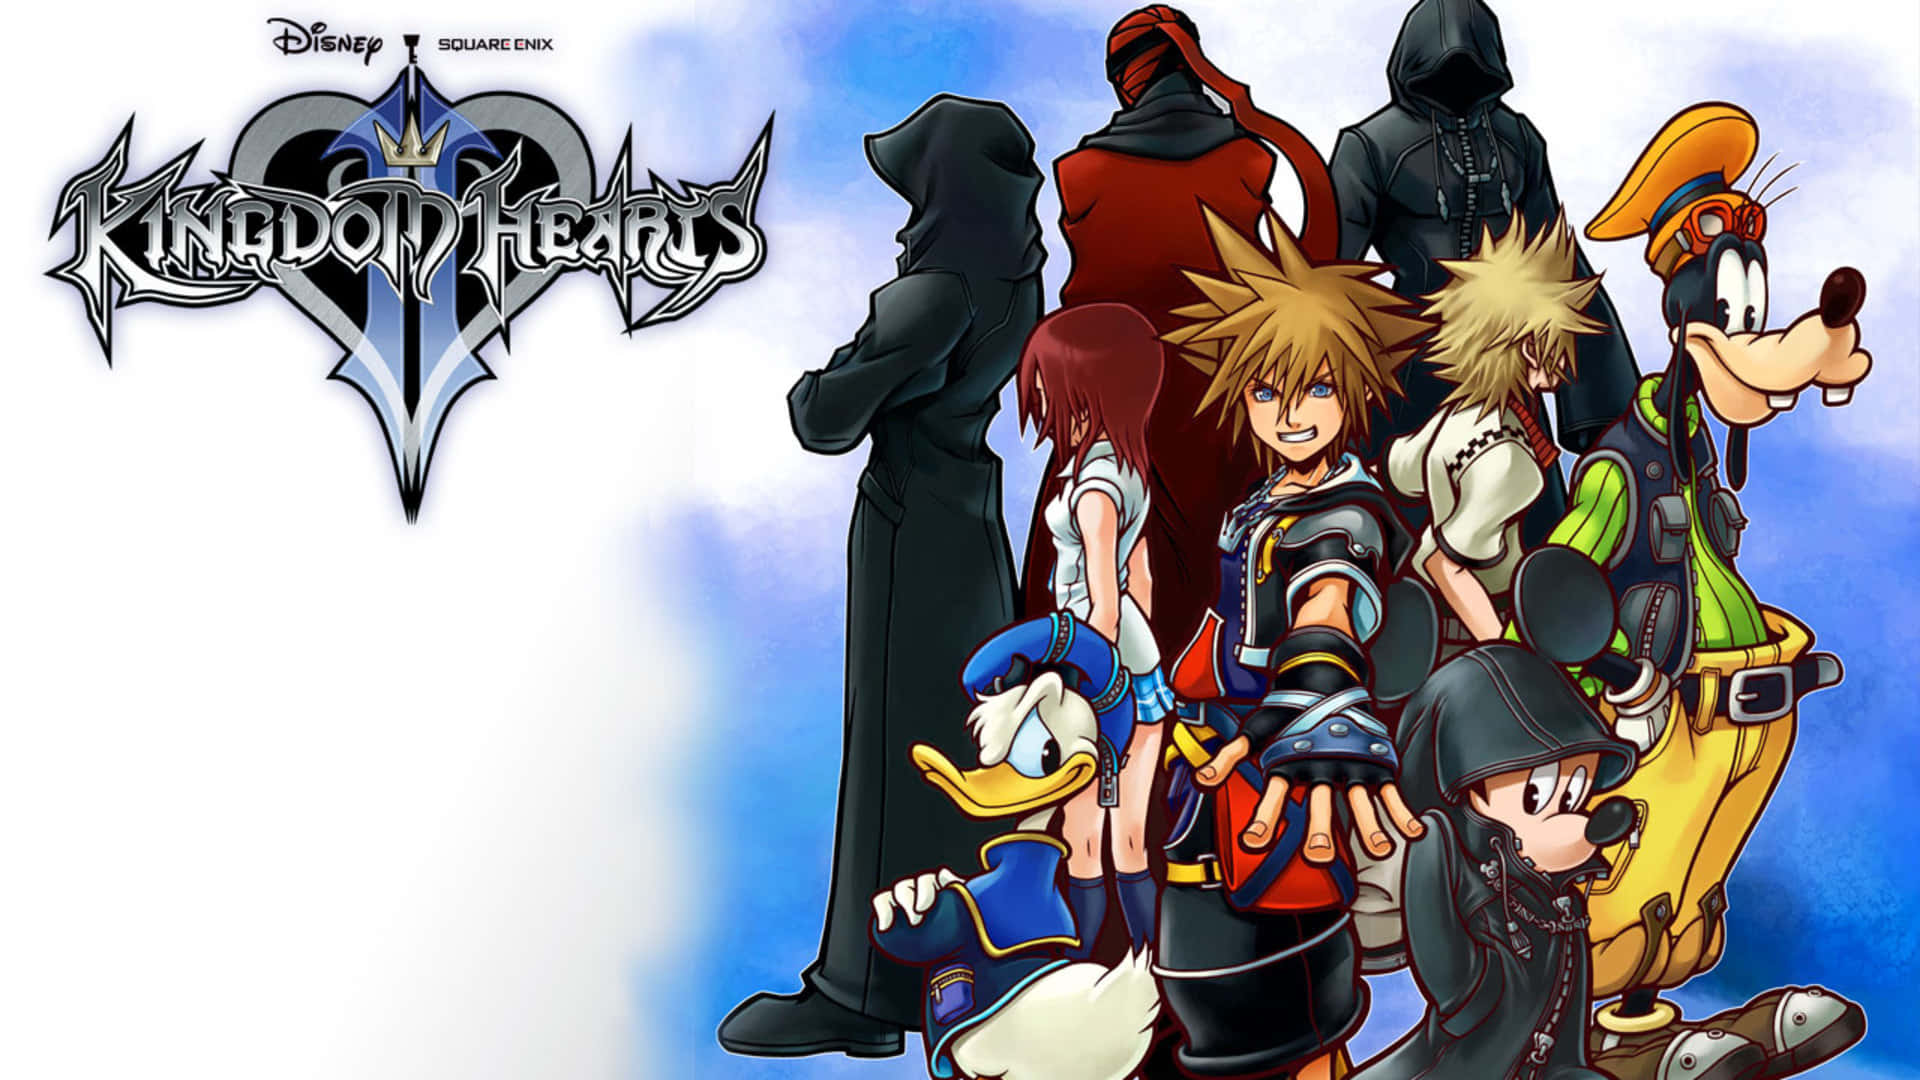 Roxas from Kingdom Hearts sparks with energy. Wallpaper